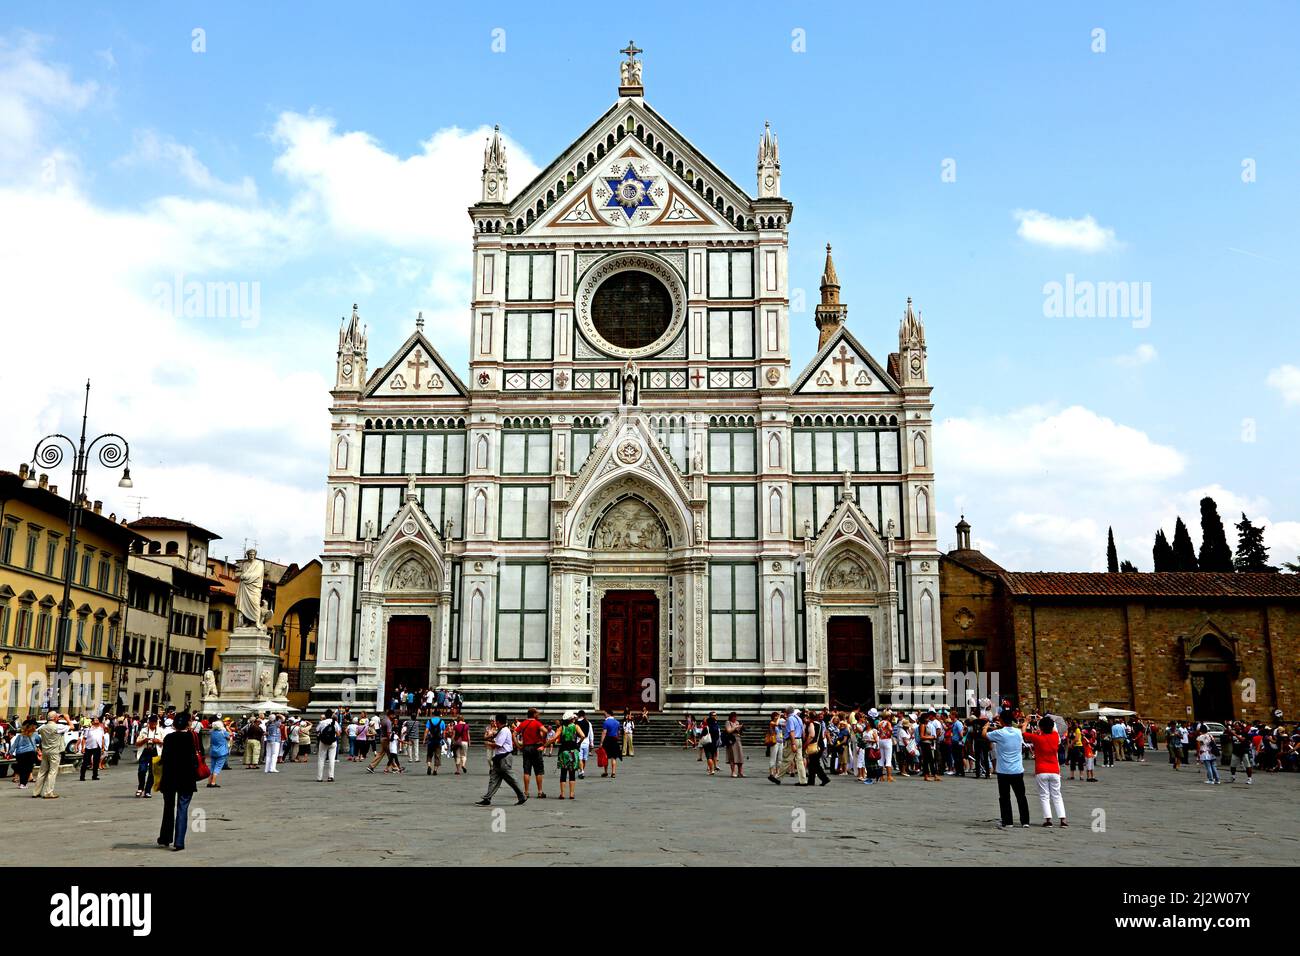 Tourists admiring the front of Basilica Santa Croce in Florence Italy Stock Photo